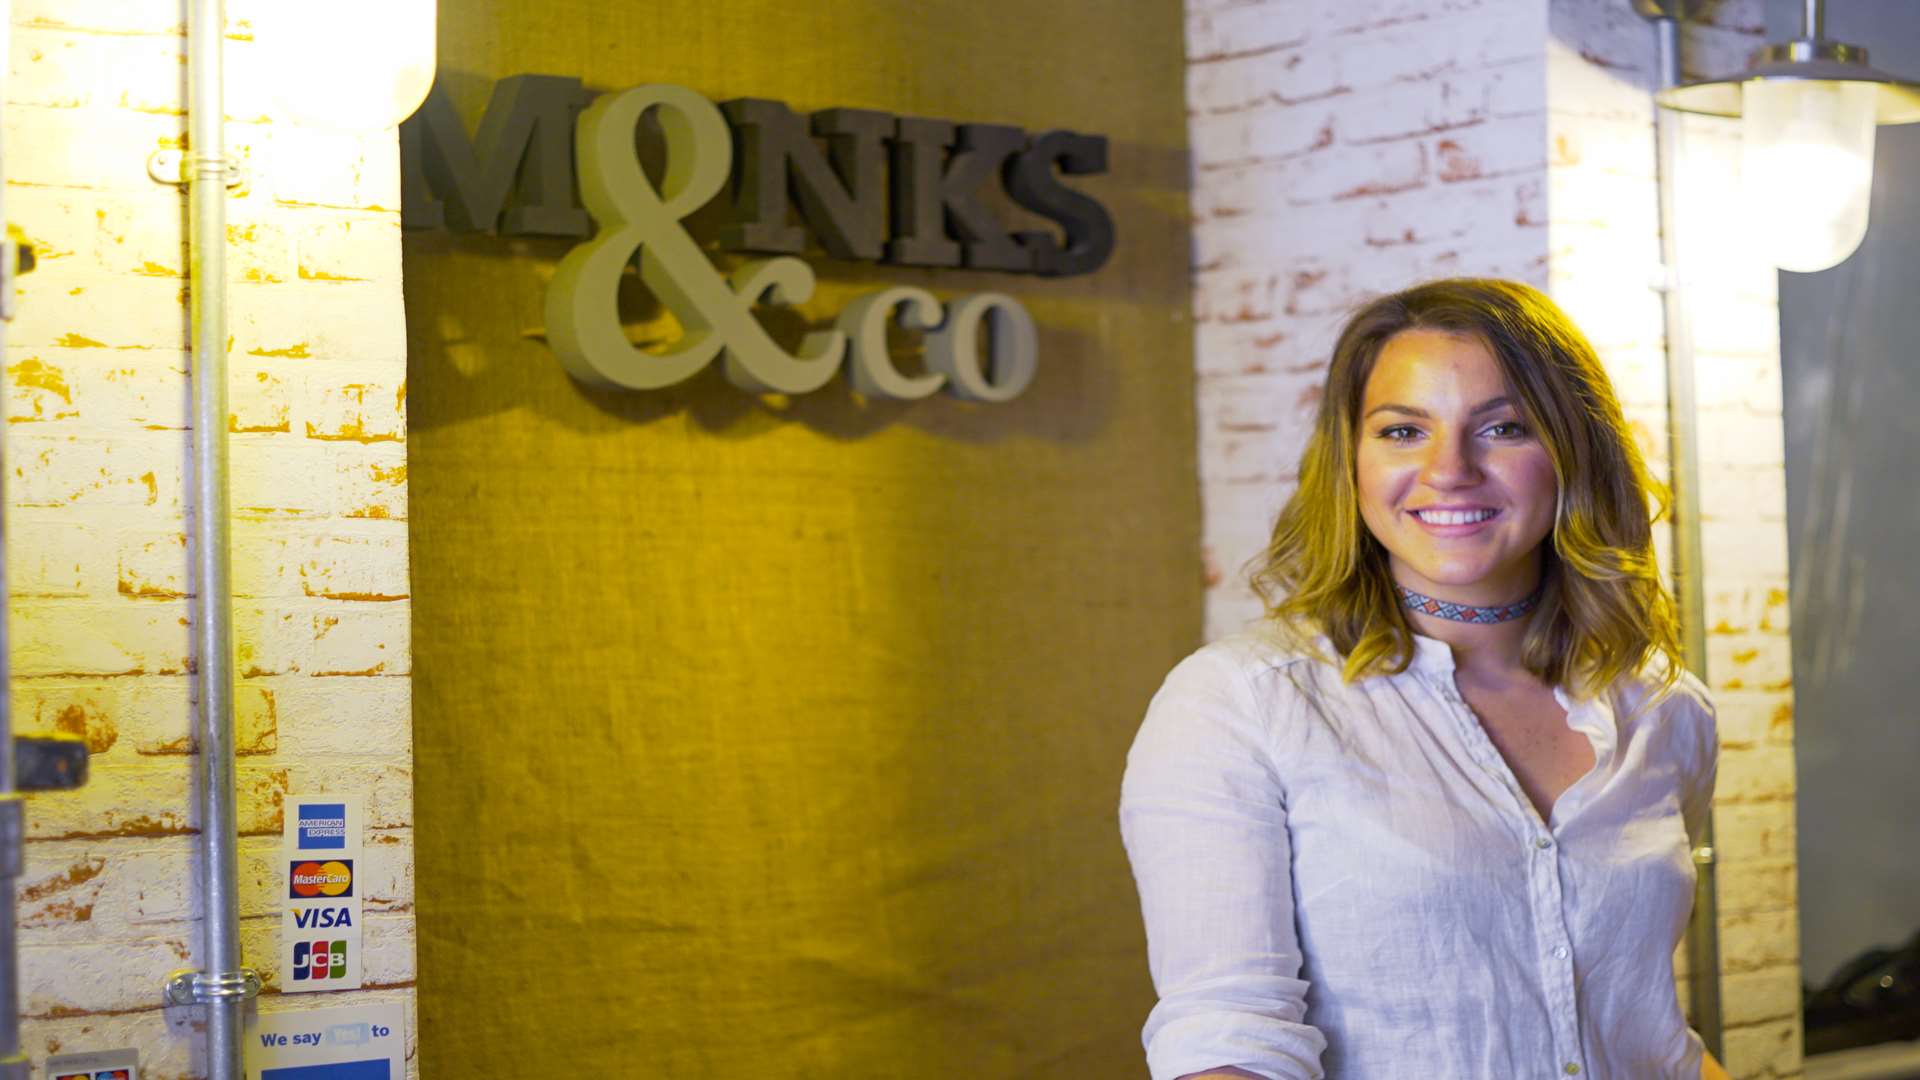 Amy Barker launched fashion retailer Monks & Co in 2013 with an £8,000 loan from Start Up Loans Company